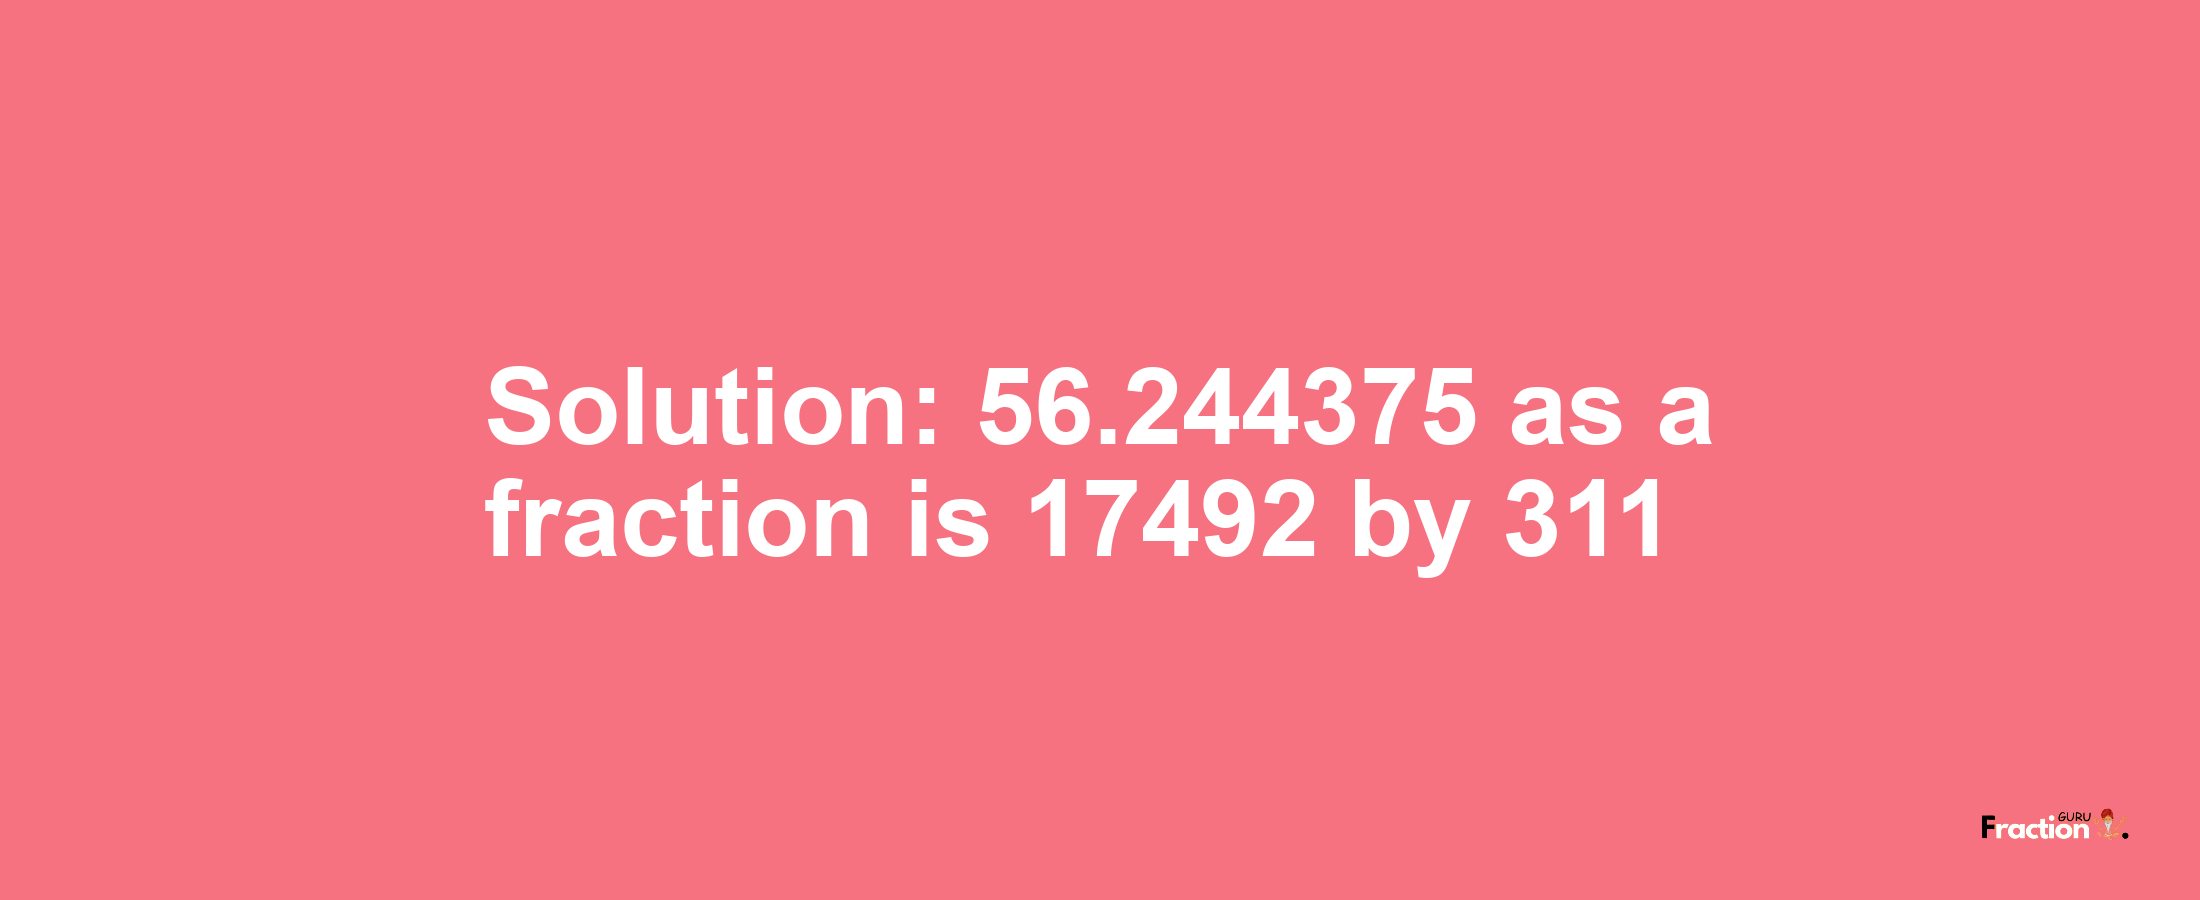 Solution:56.244375 as a fraction is 17492/311